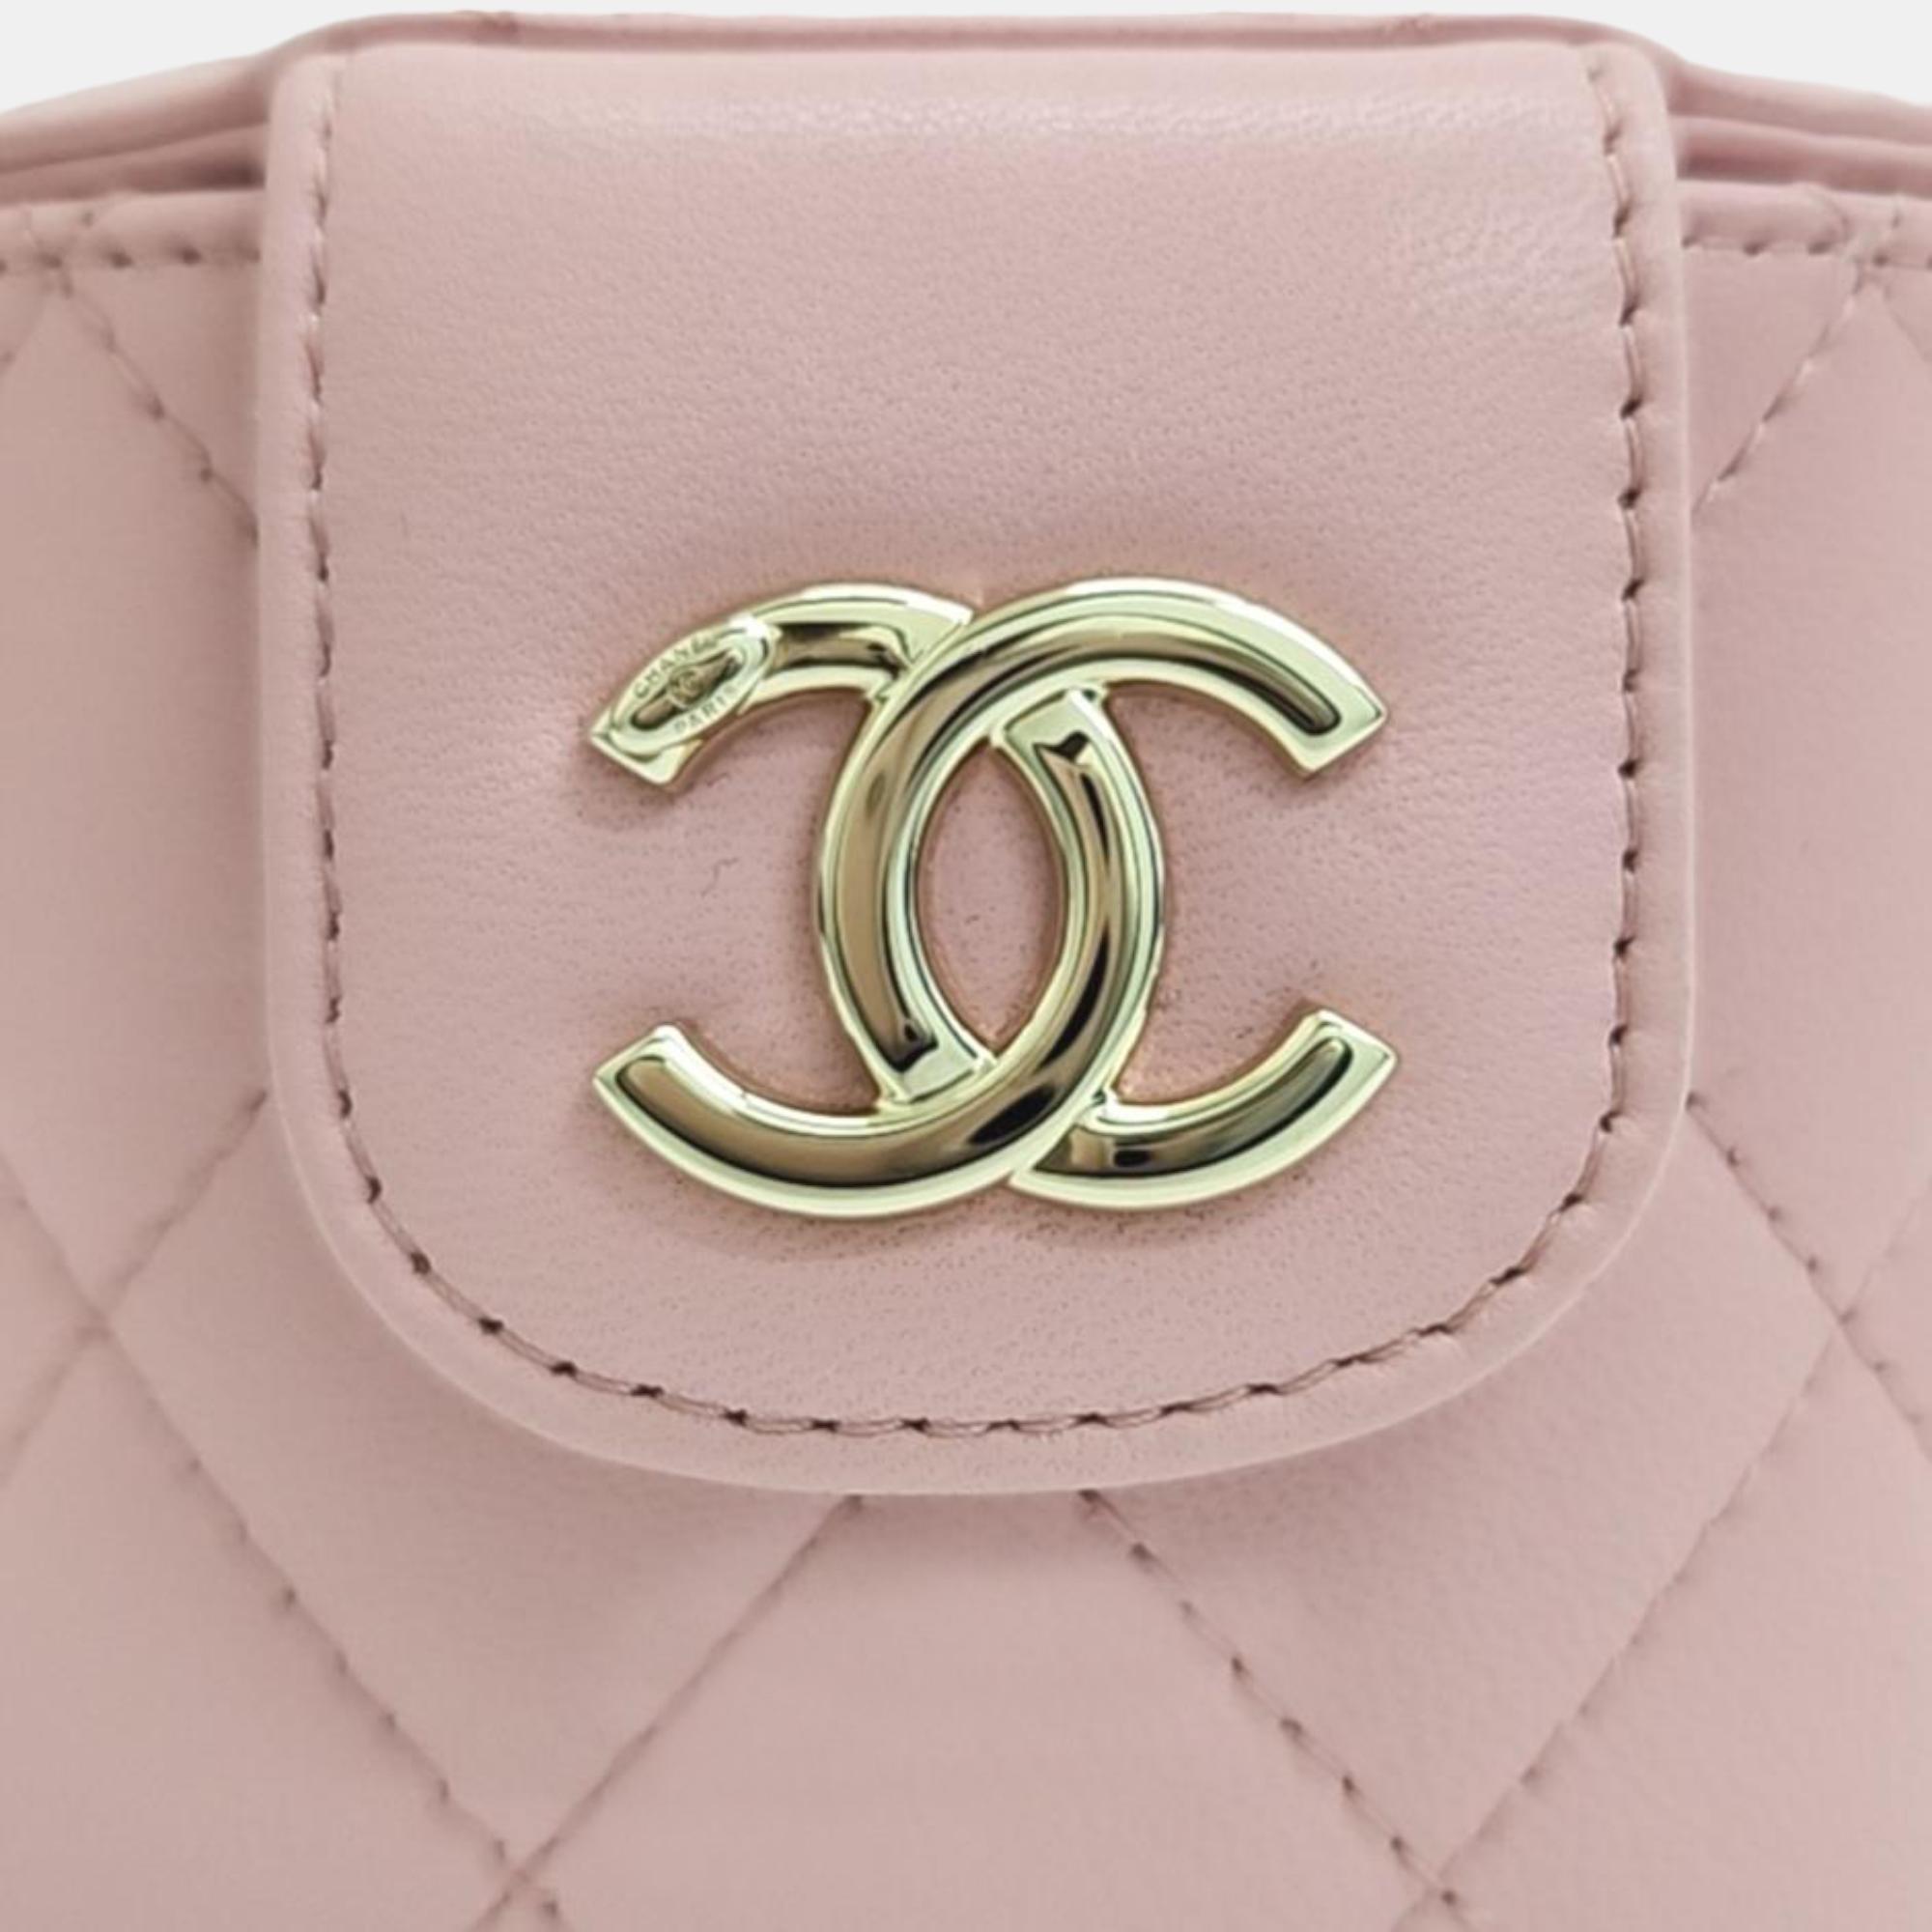 Chanel Pink Leather Mini Vanity Case Clutch Bag